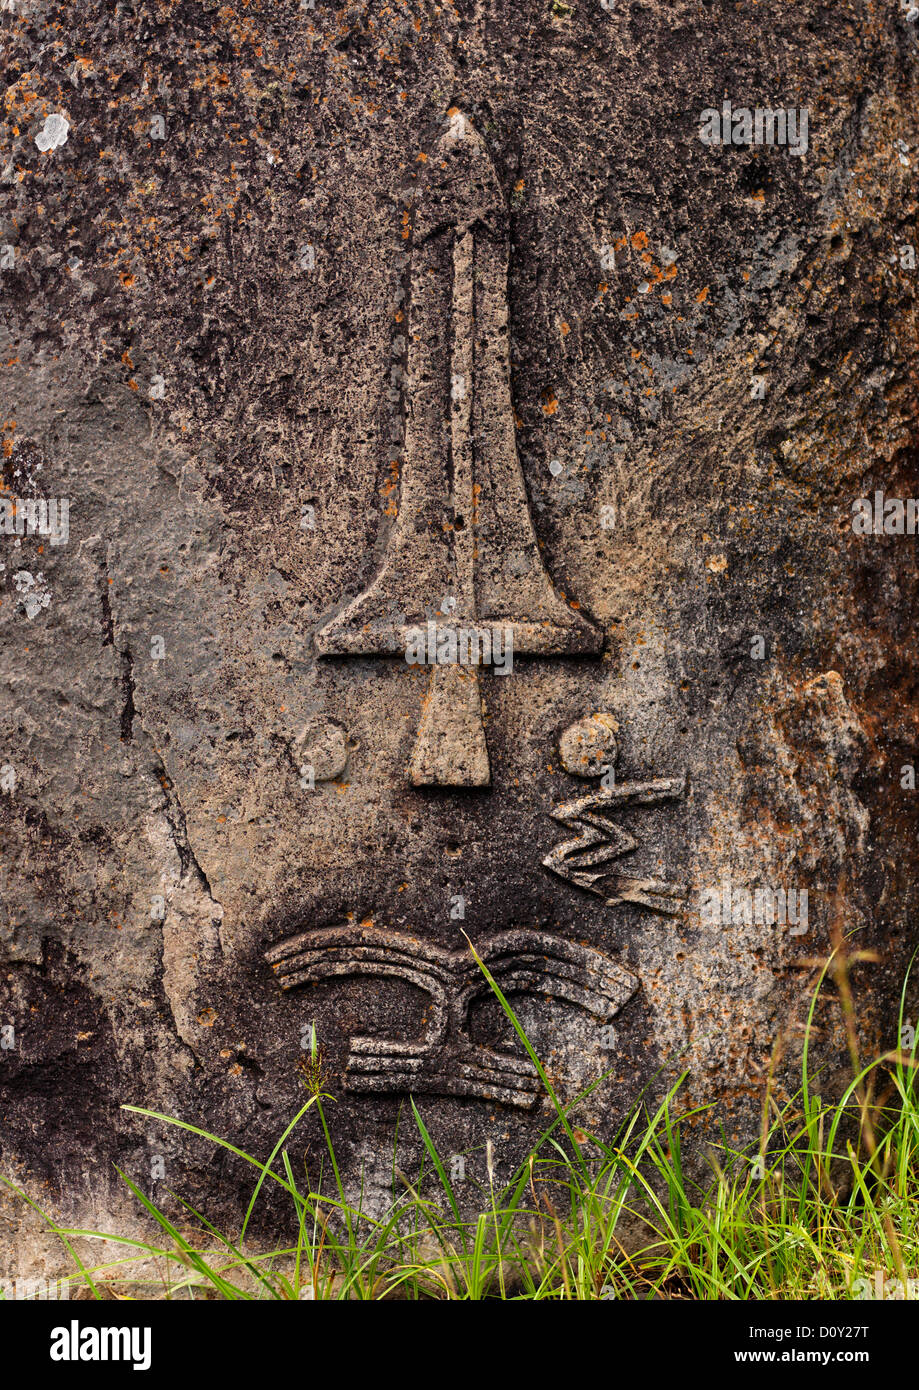 Carved Headrest And Dagger In The Site Of Tiya, Unesco World Heritage Site, Tiya, Ethiopia Stock Photo